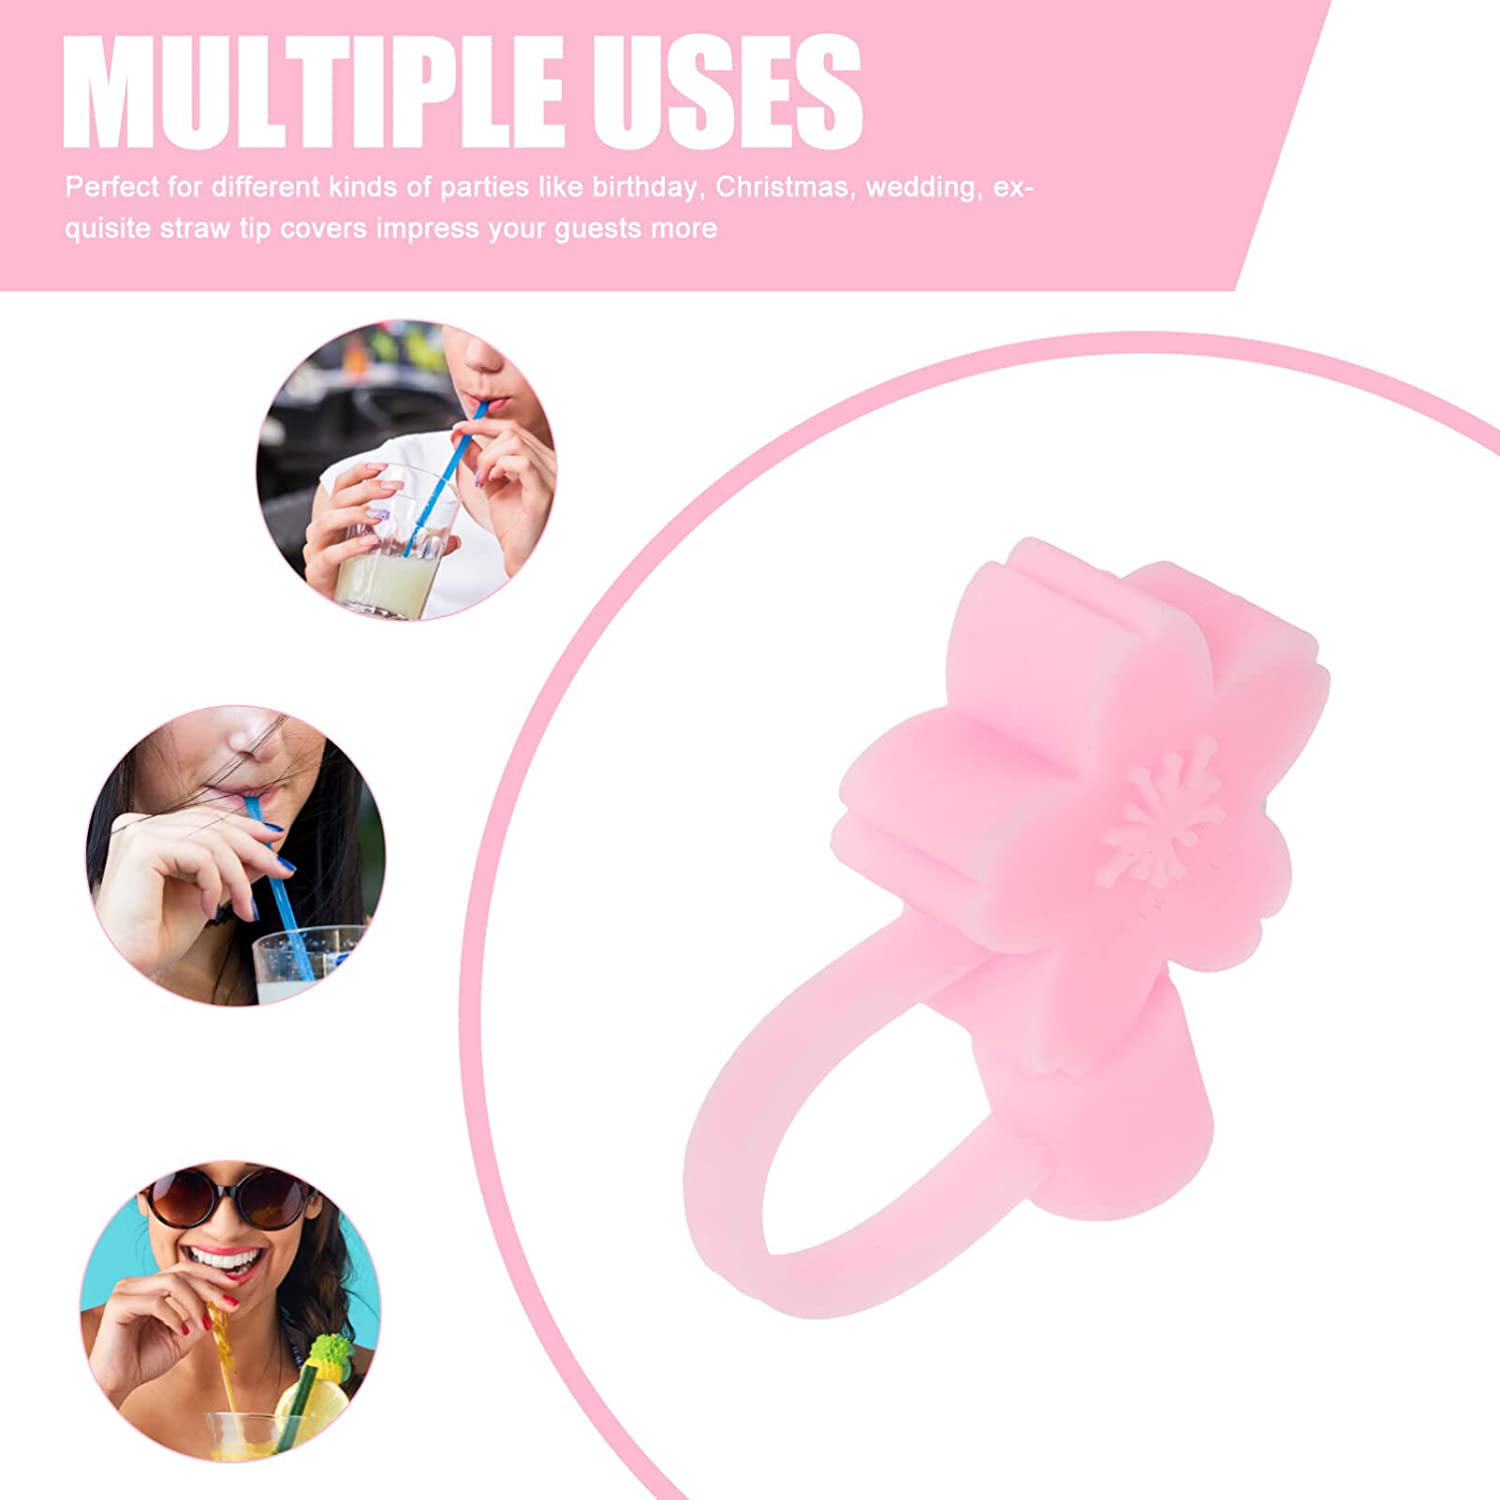 KJHBV 8pcs Straws Flower Shaped Straw Stopper Reusable Straw Covers Straw  Charms for Tumblers Straw End Protectors Straw Tip Covers Cartoon Straw  Plug